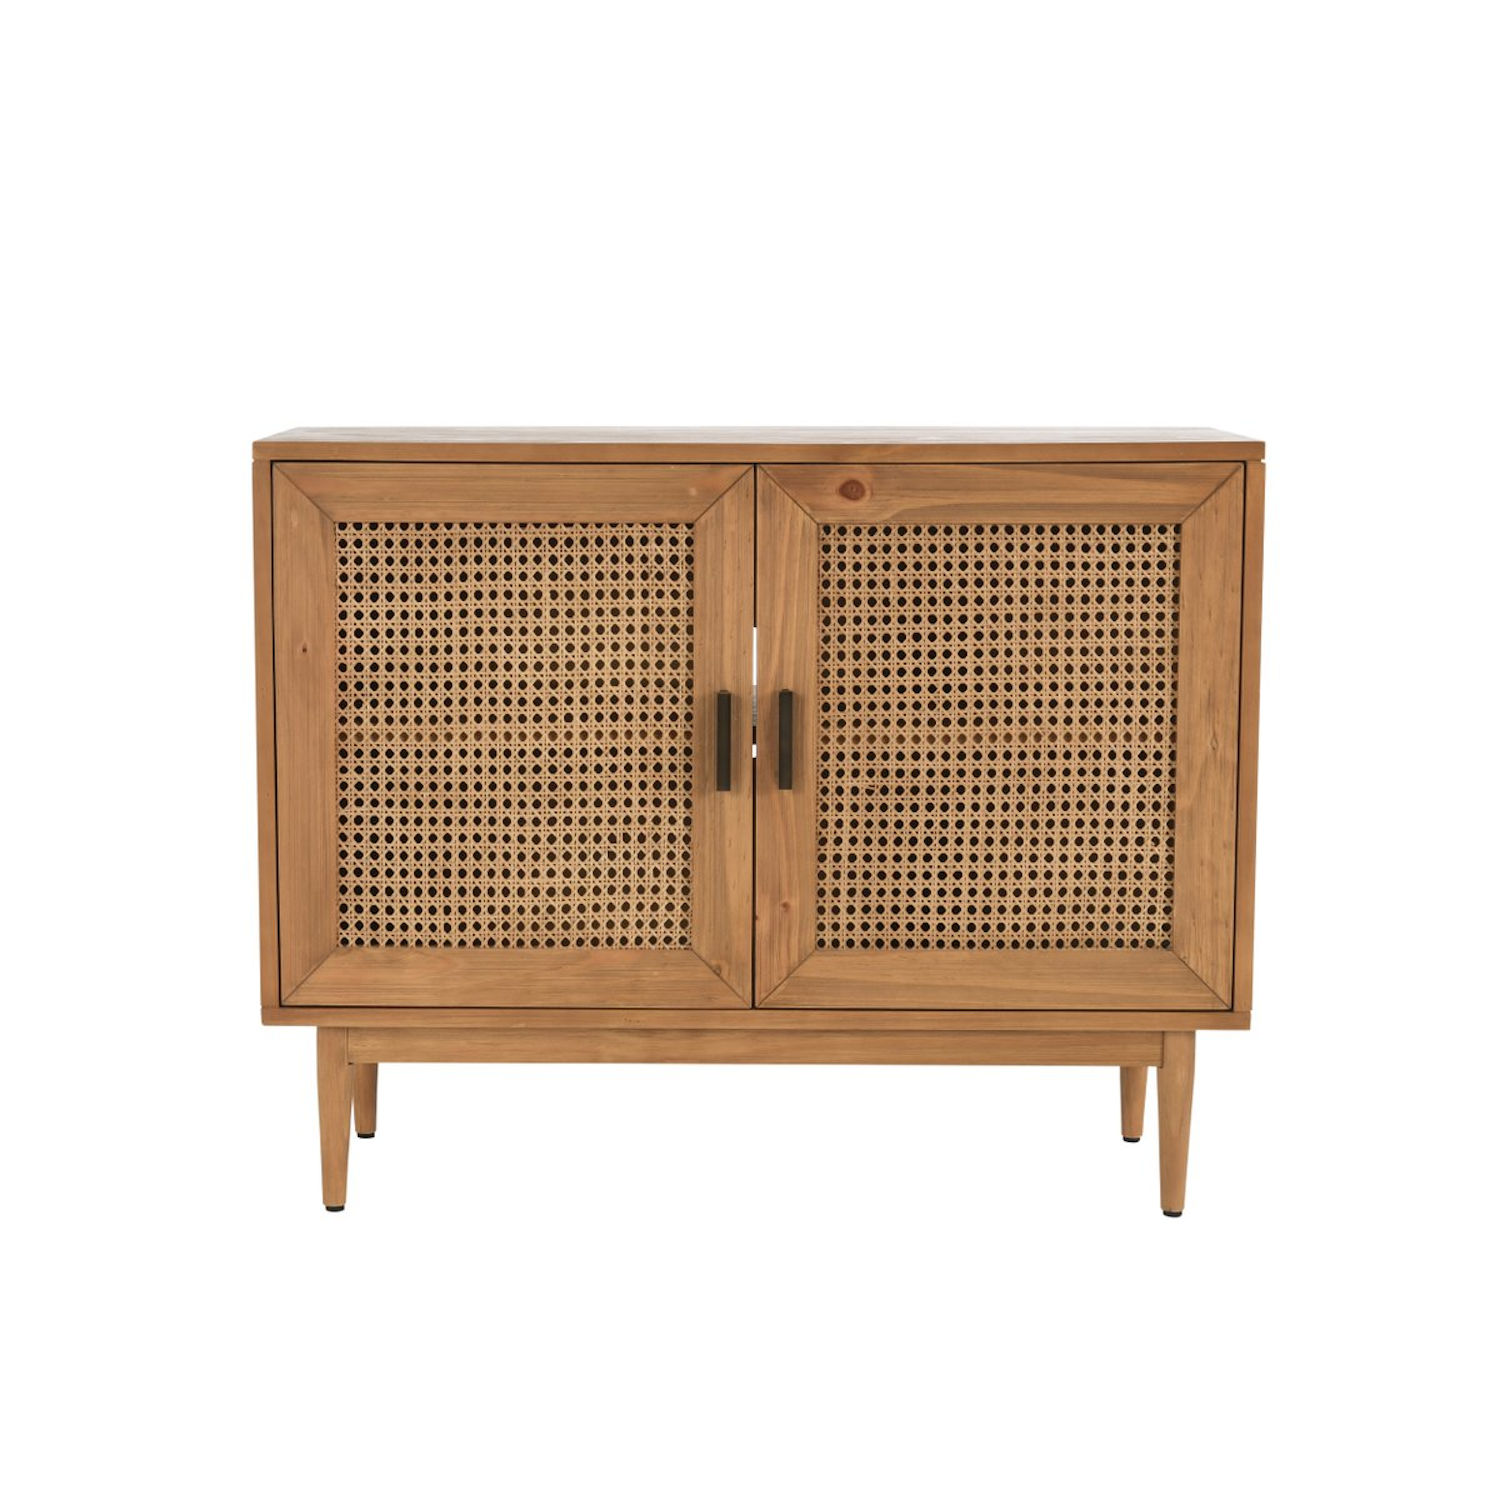 Accent Cabinets & Chests Category